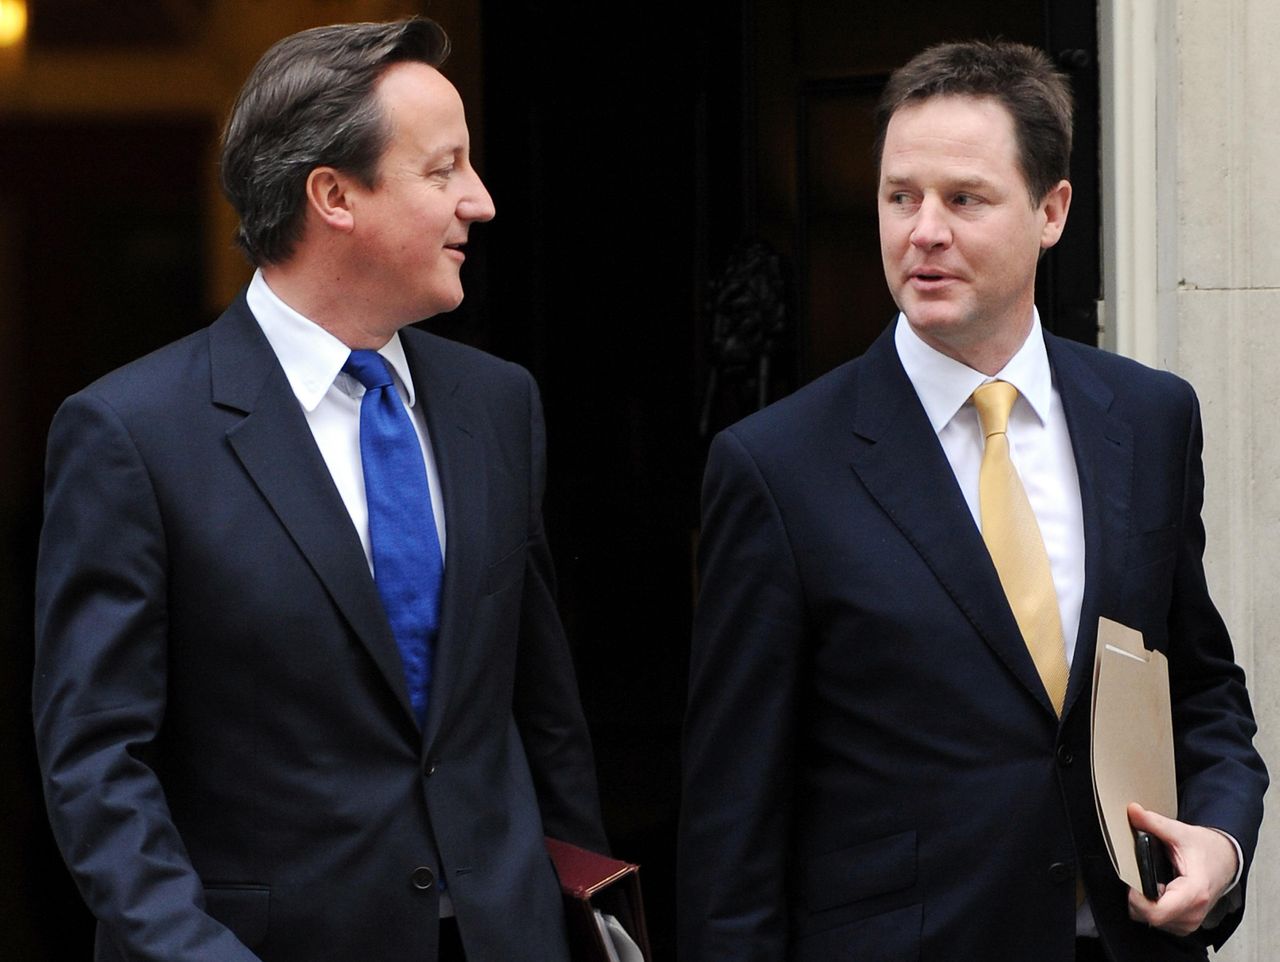 David Cameron and Nick Clegg leave 10 Downing Street during their time in office.